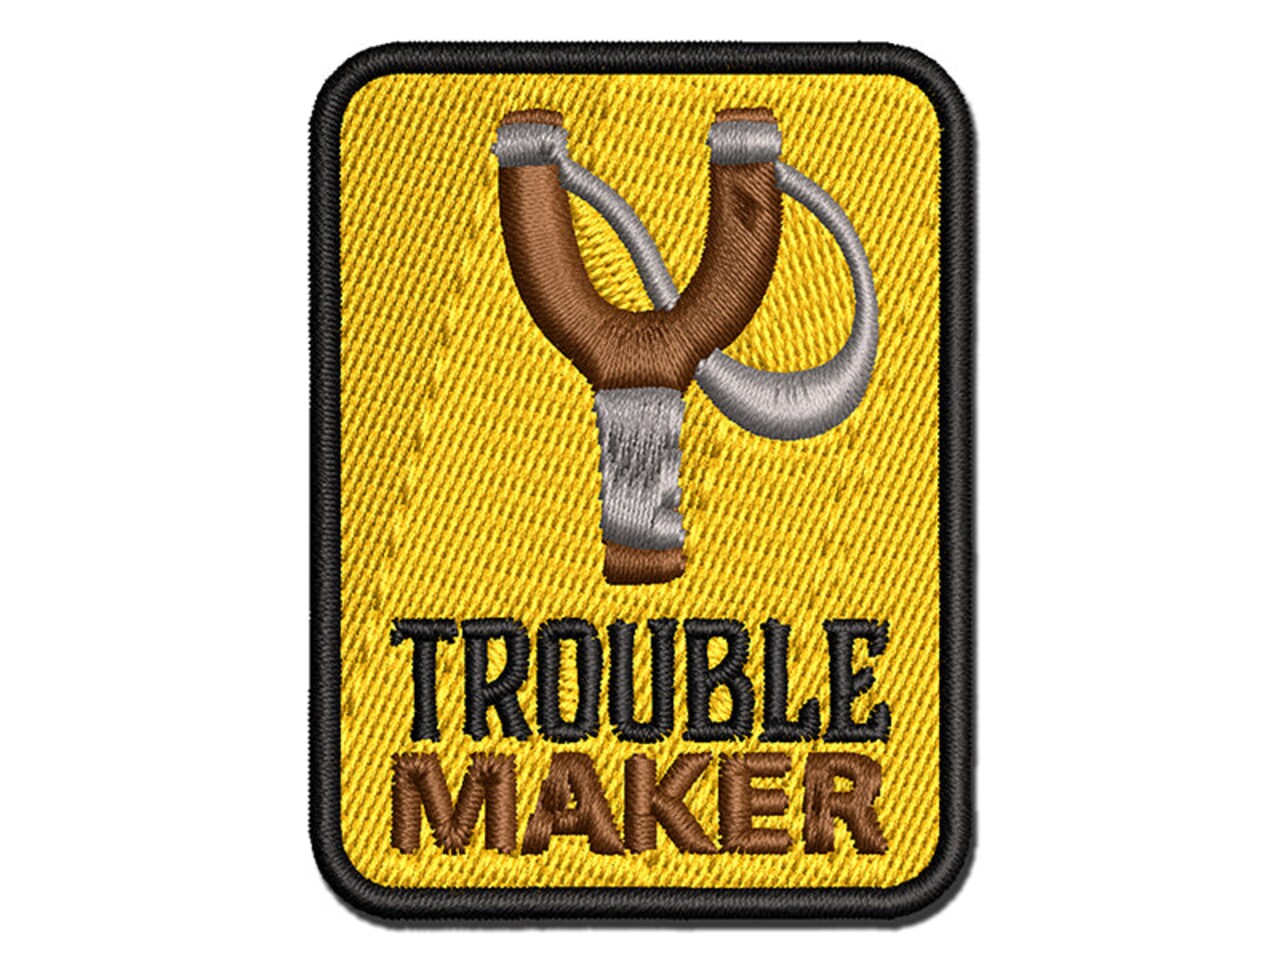 Trouble Maker Slingshot Multi-Color Embroidered Iron-On Patch Applique